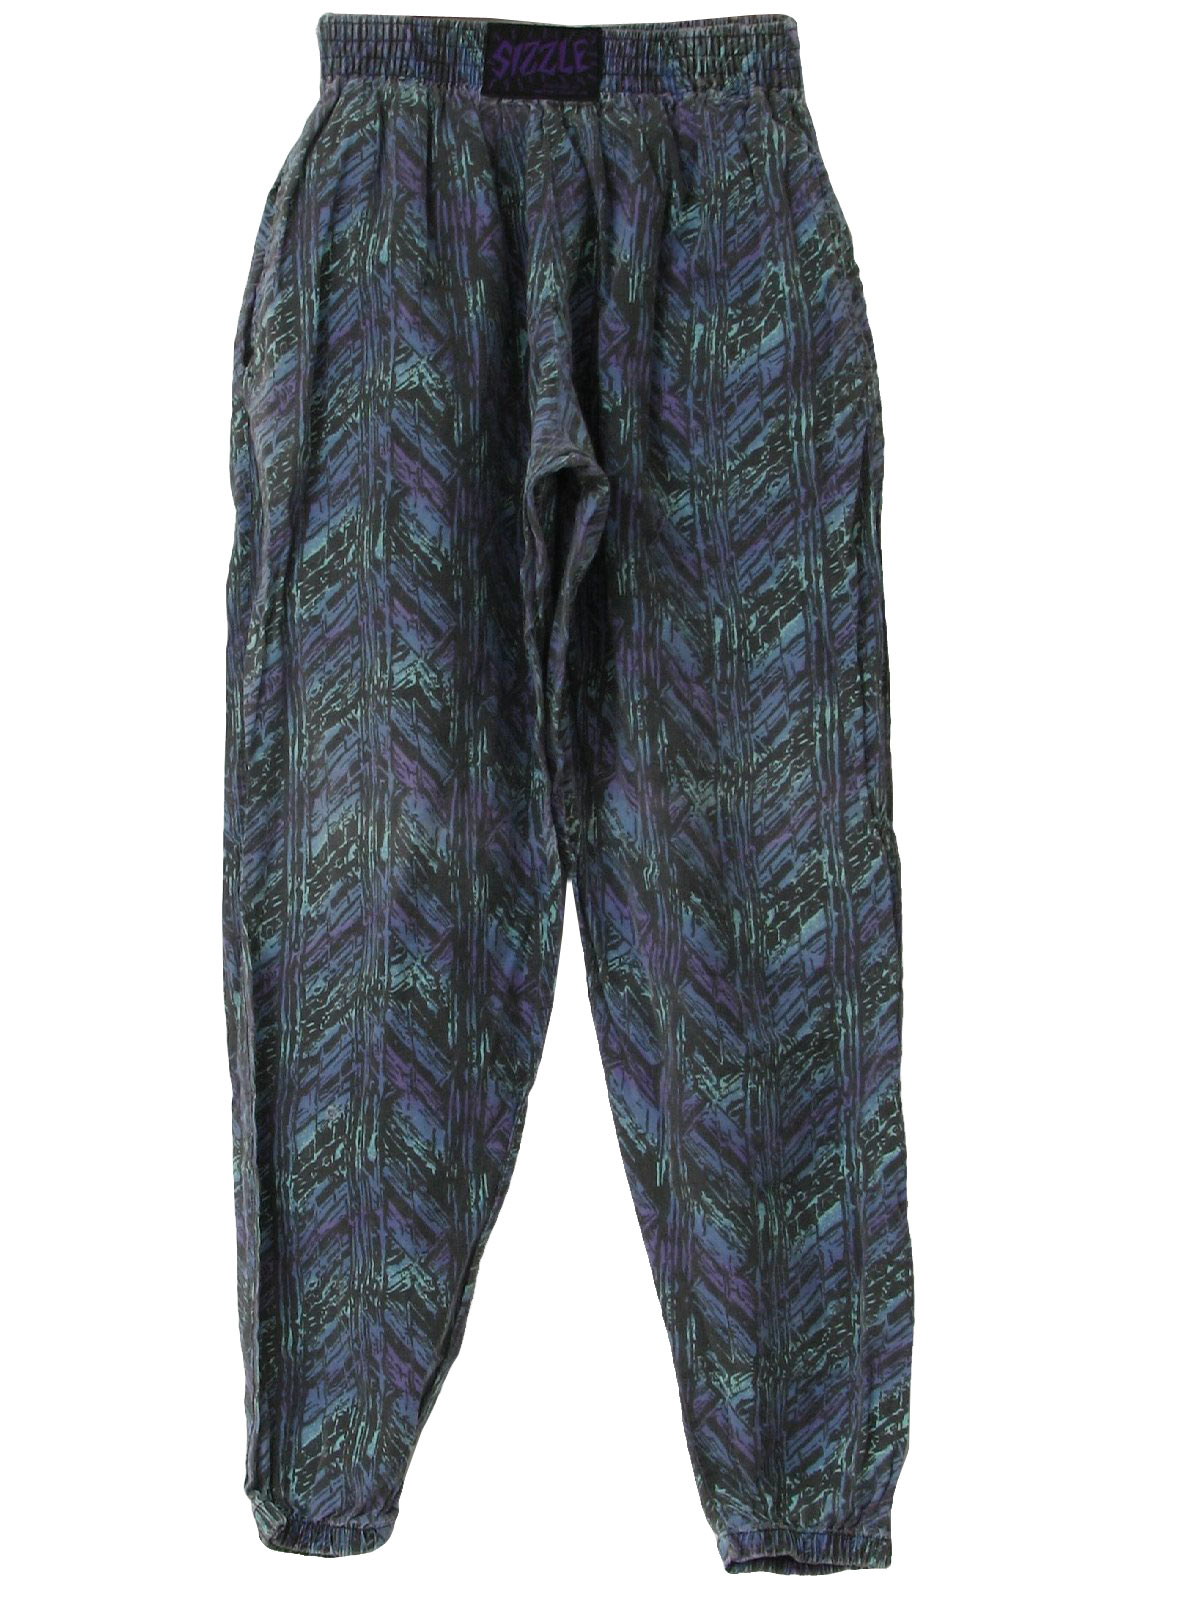 1980's Pants (Sizzle): 80s -Sizzle- It looks like a dull violet and ...